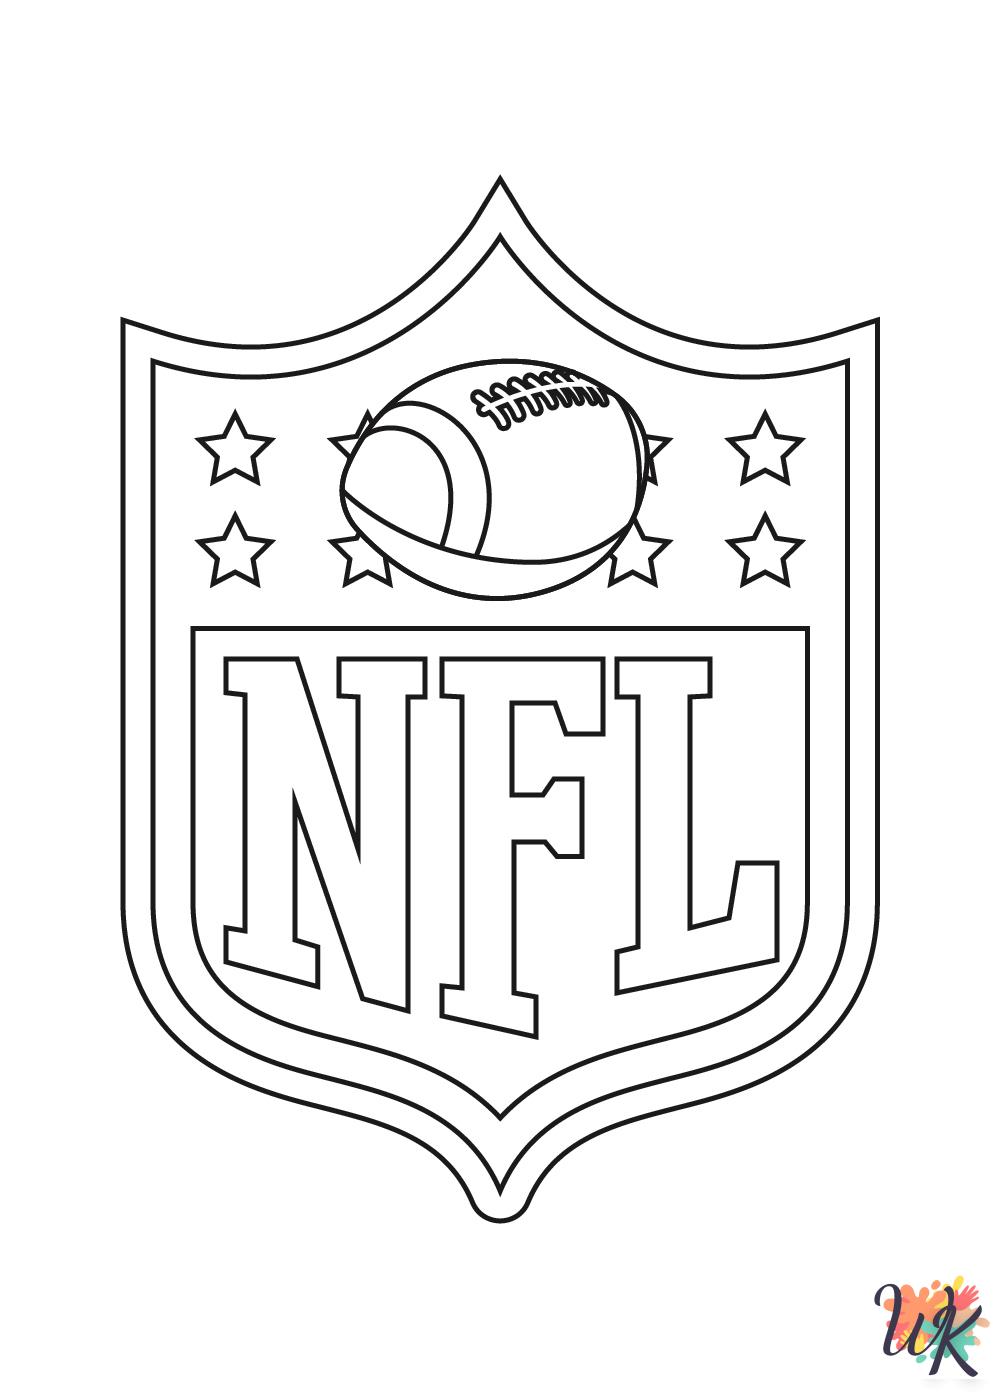 NFL Coloring Pages 8